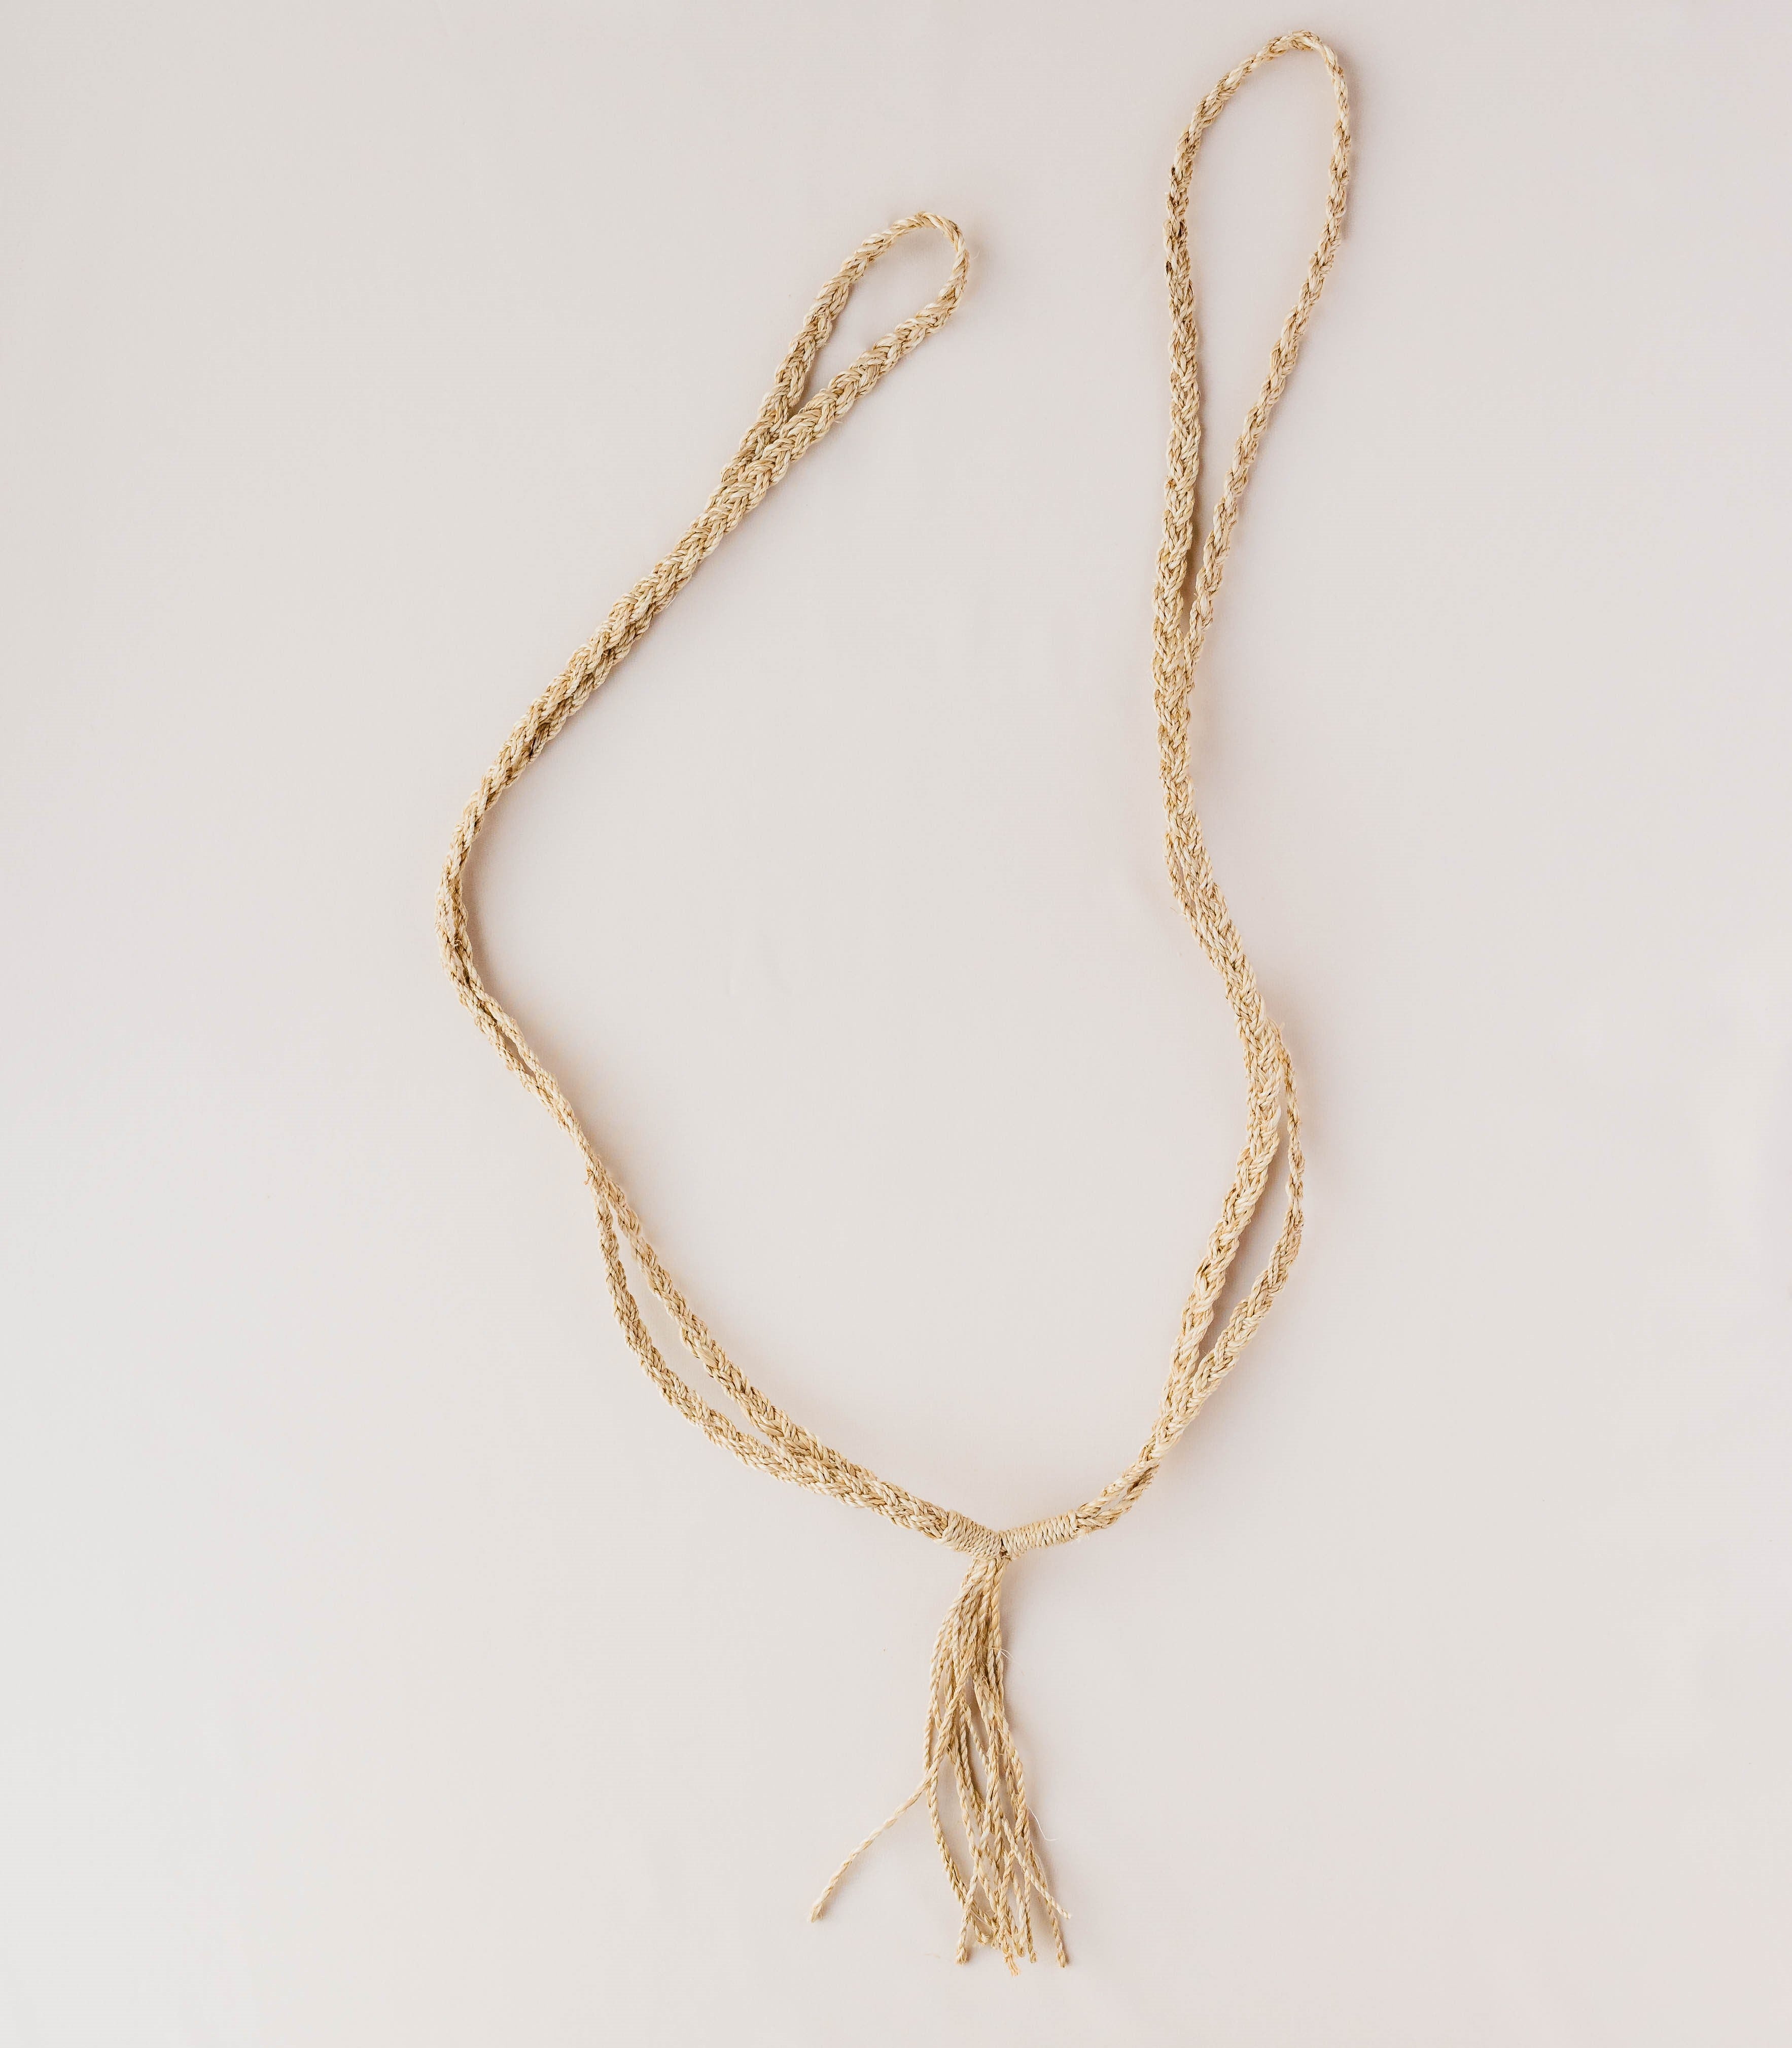 Woven Abaca Unity Cord - The Wedding Library